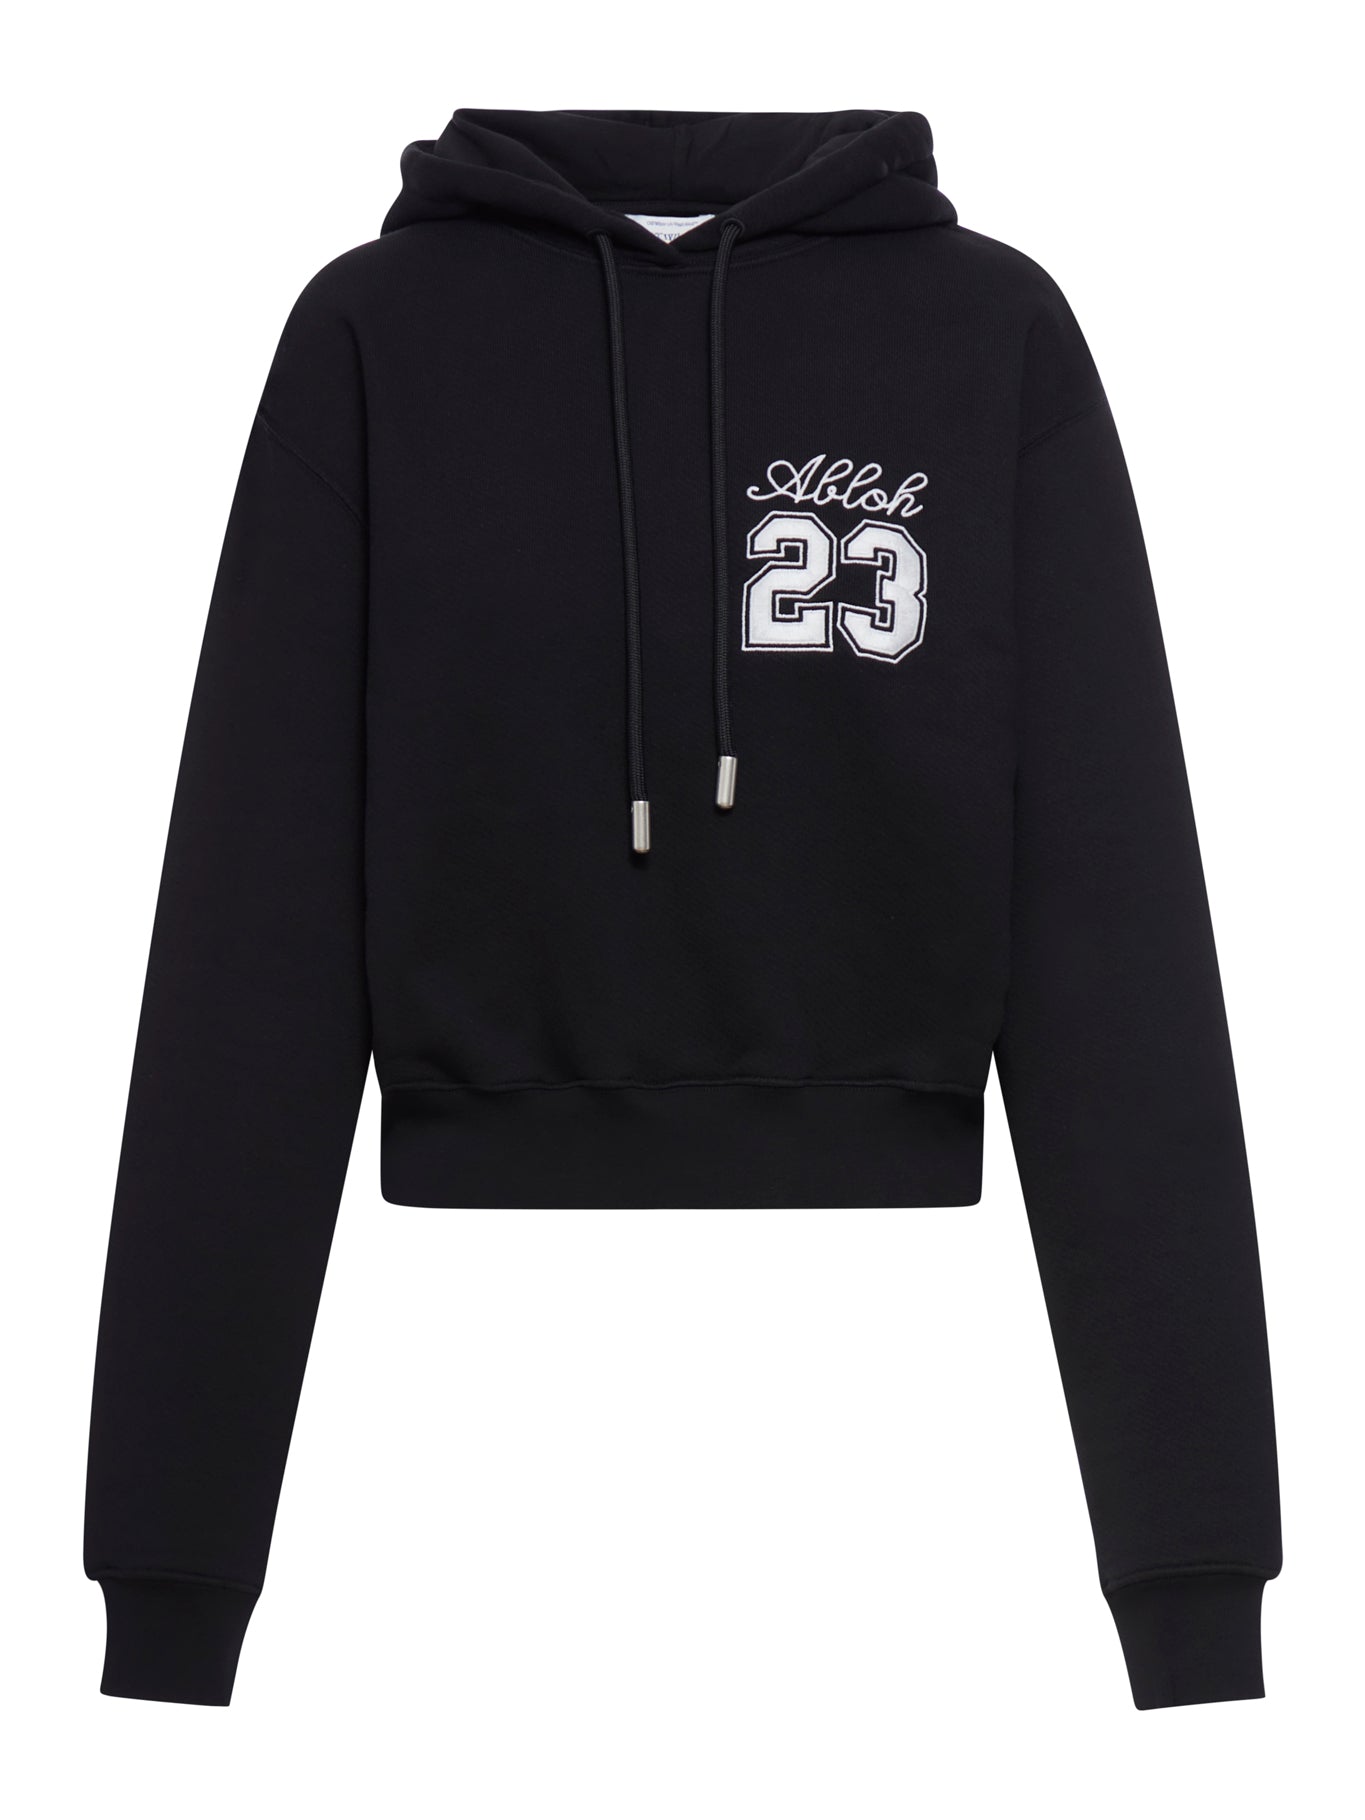 EMBR CROPPED HOODIE